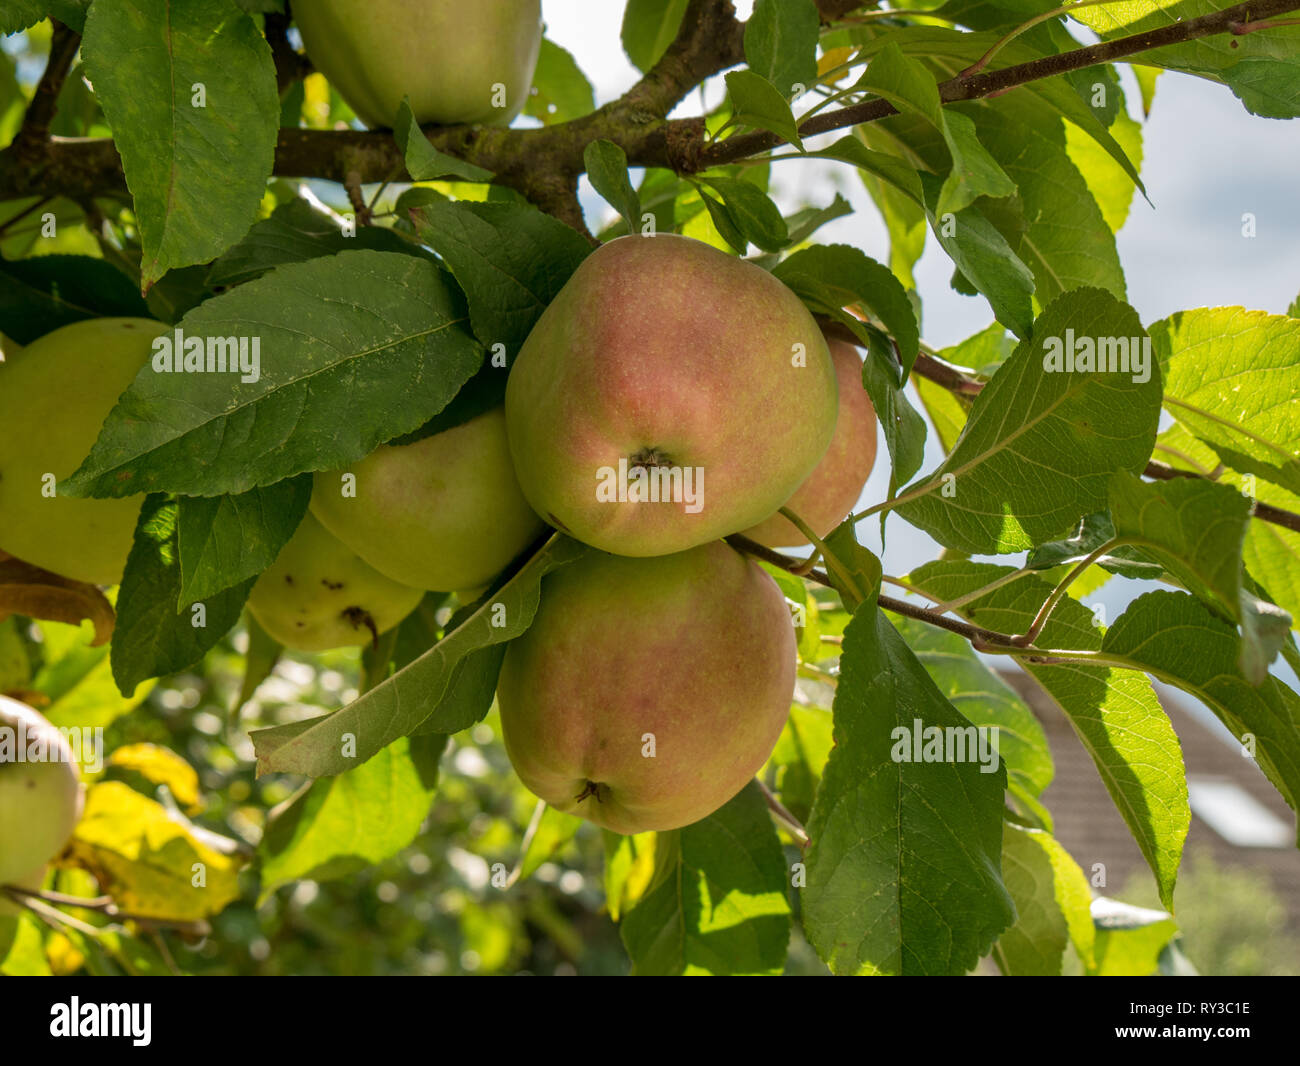 Ripe red green apples hang between leaves on the apple tree in summer Stock Photo